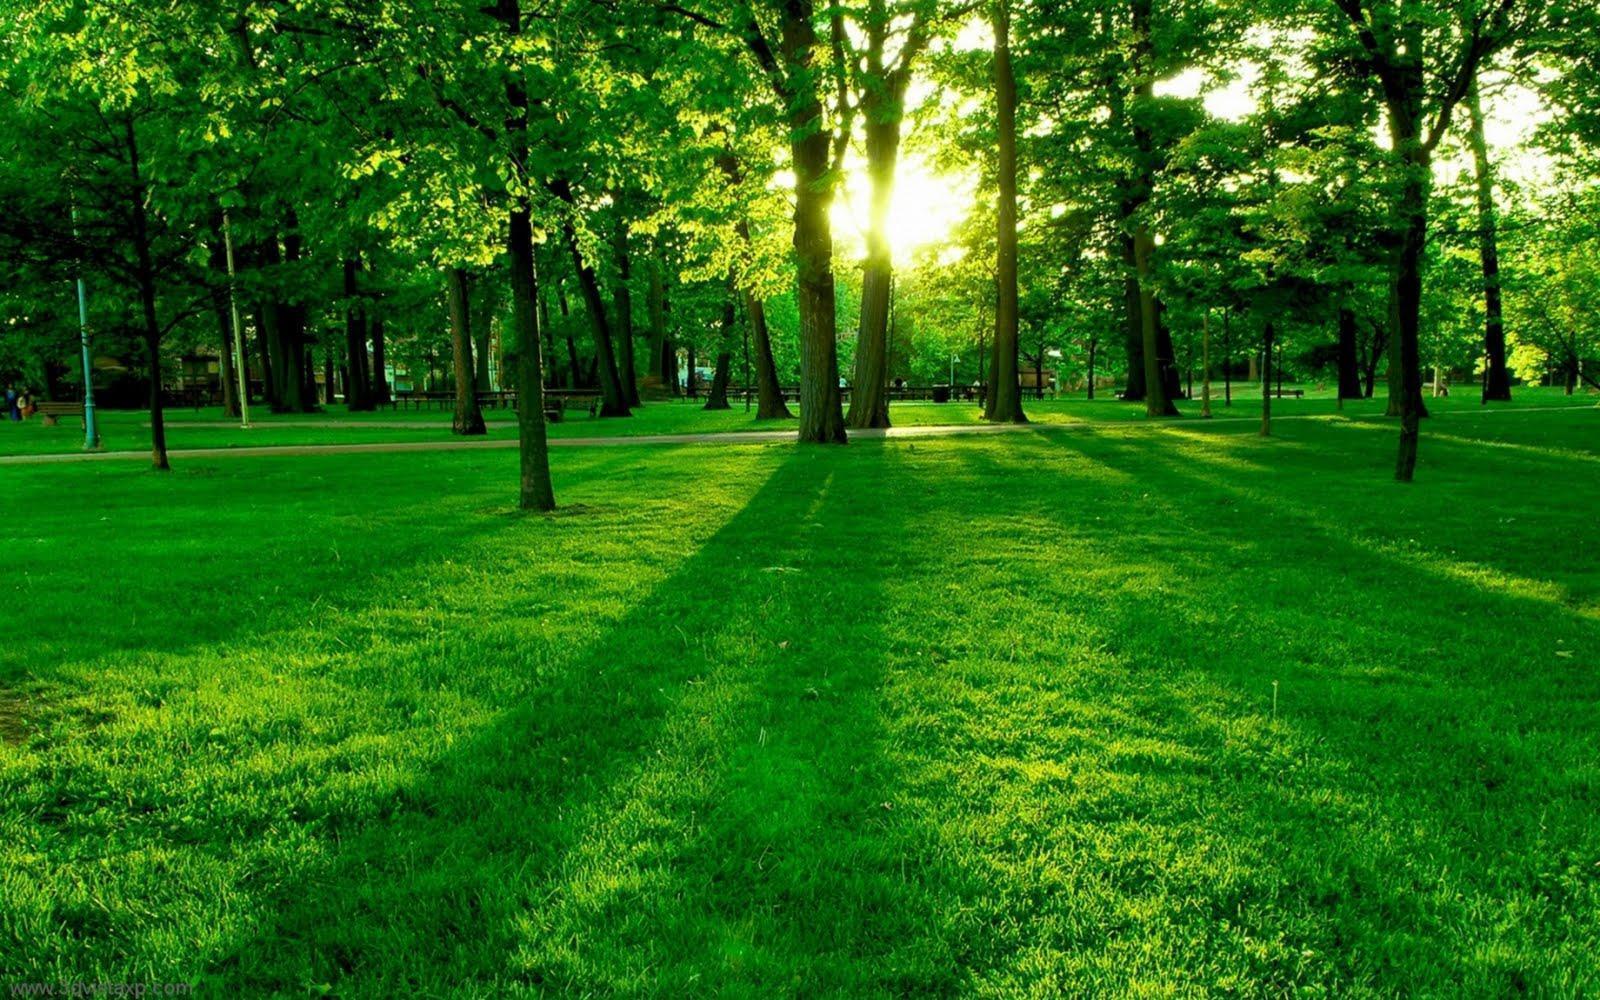 Green Nature HD Wallpaper. journey to success